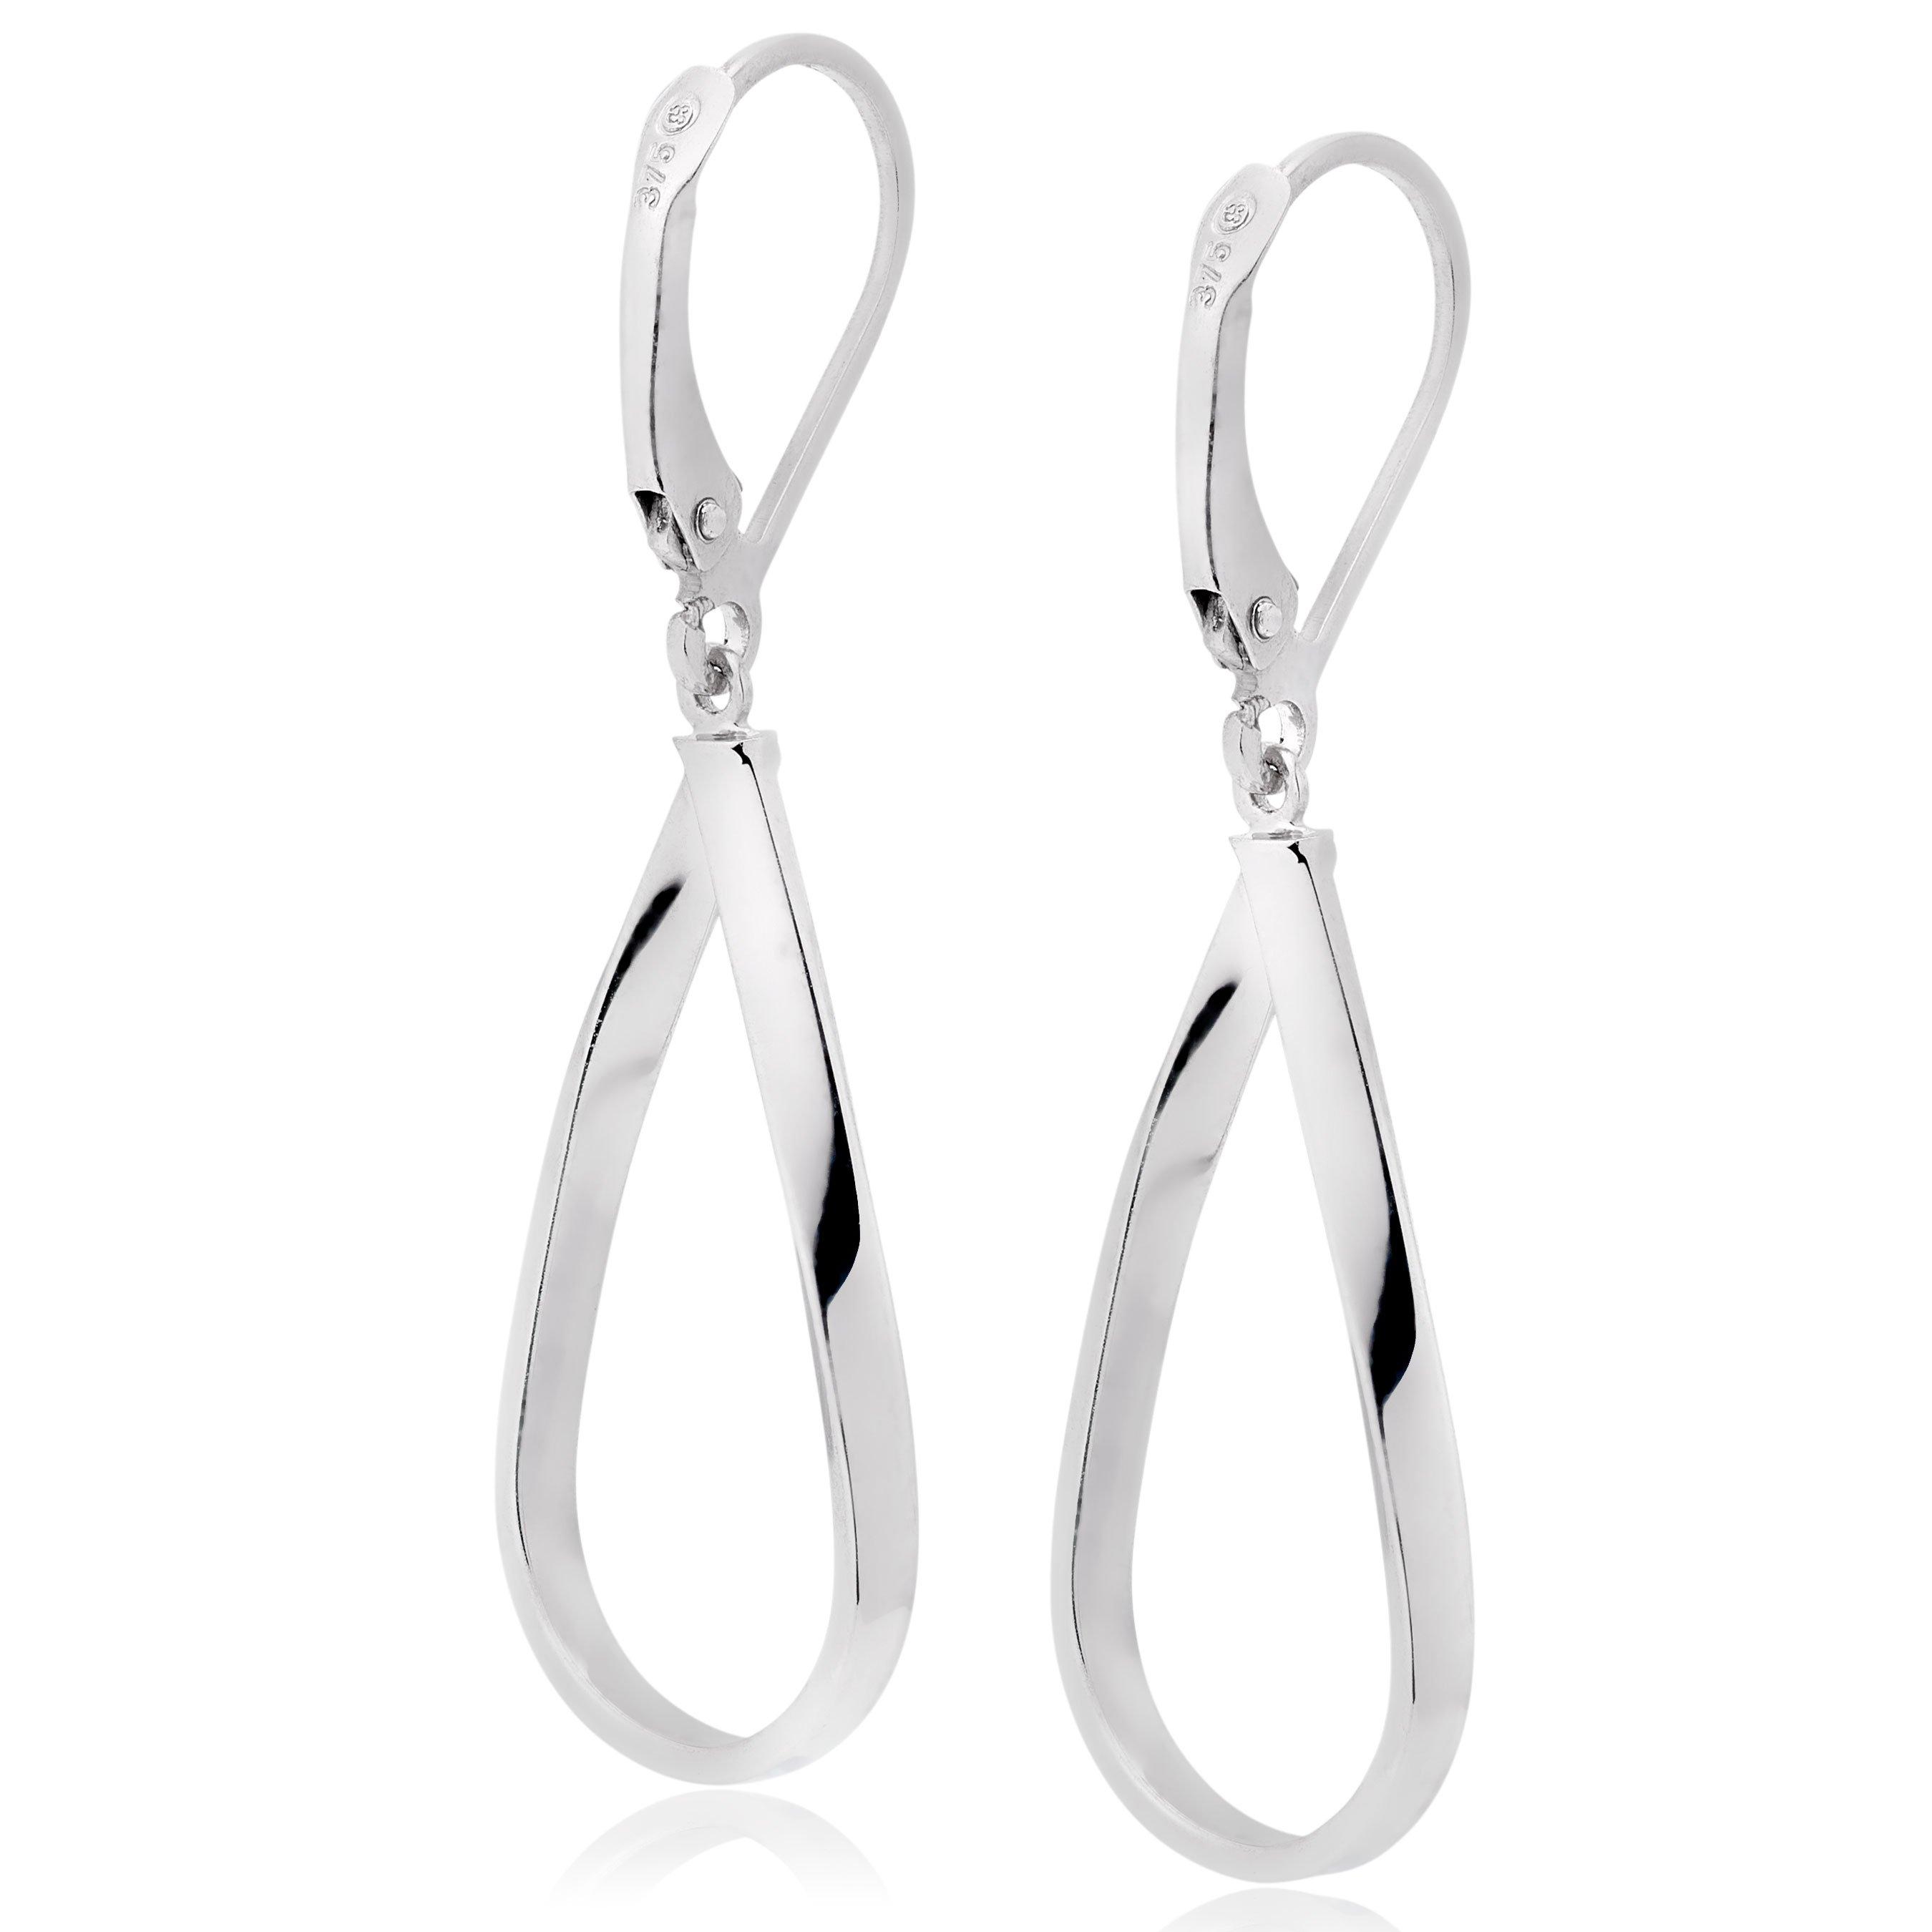 9ct White Gold Drop Earrings | 0127163 | Beaverbrooks the Jewellers